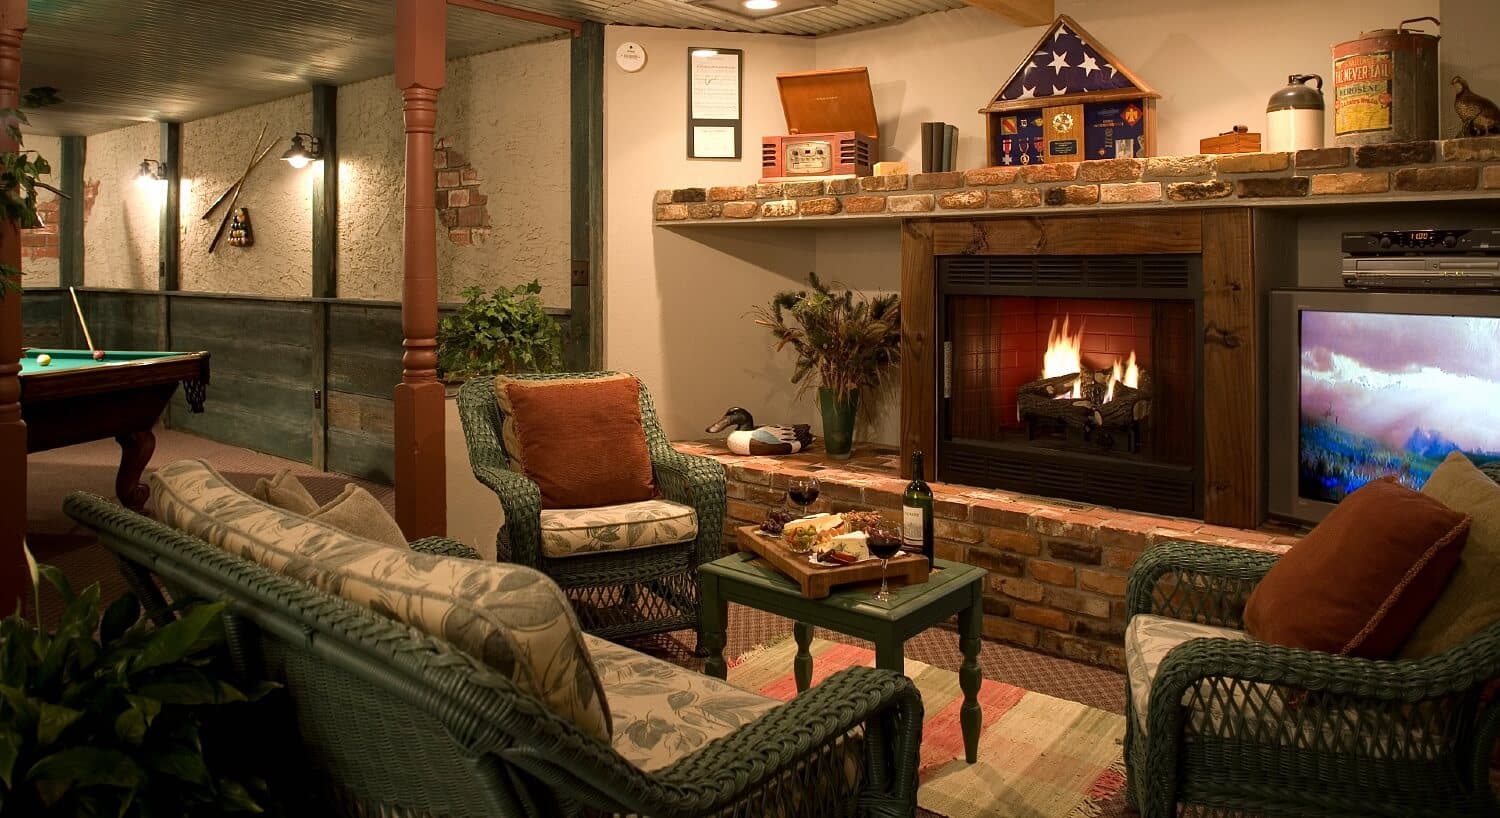 Basement room of a home couch and chairs in front of a roaring fireplace, TV and a side room with a pool table